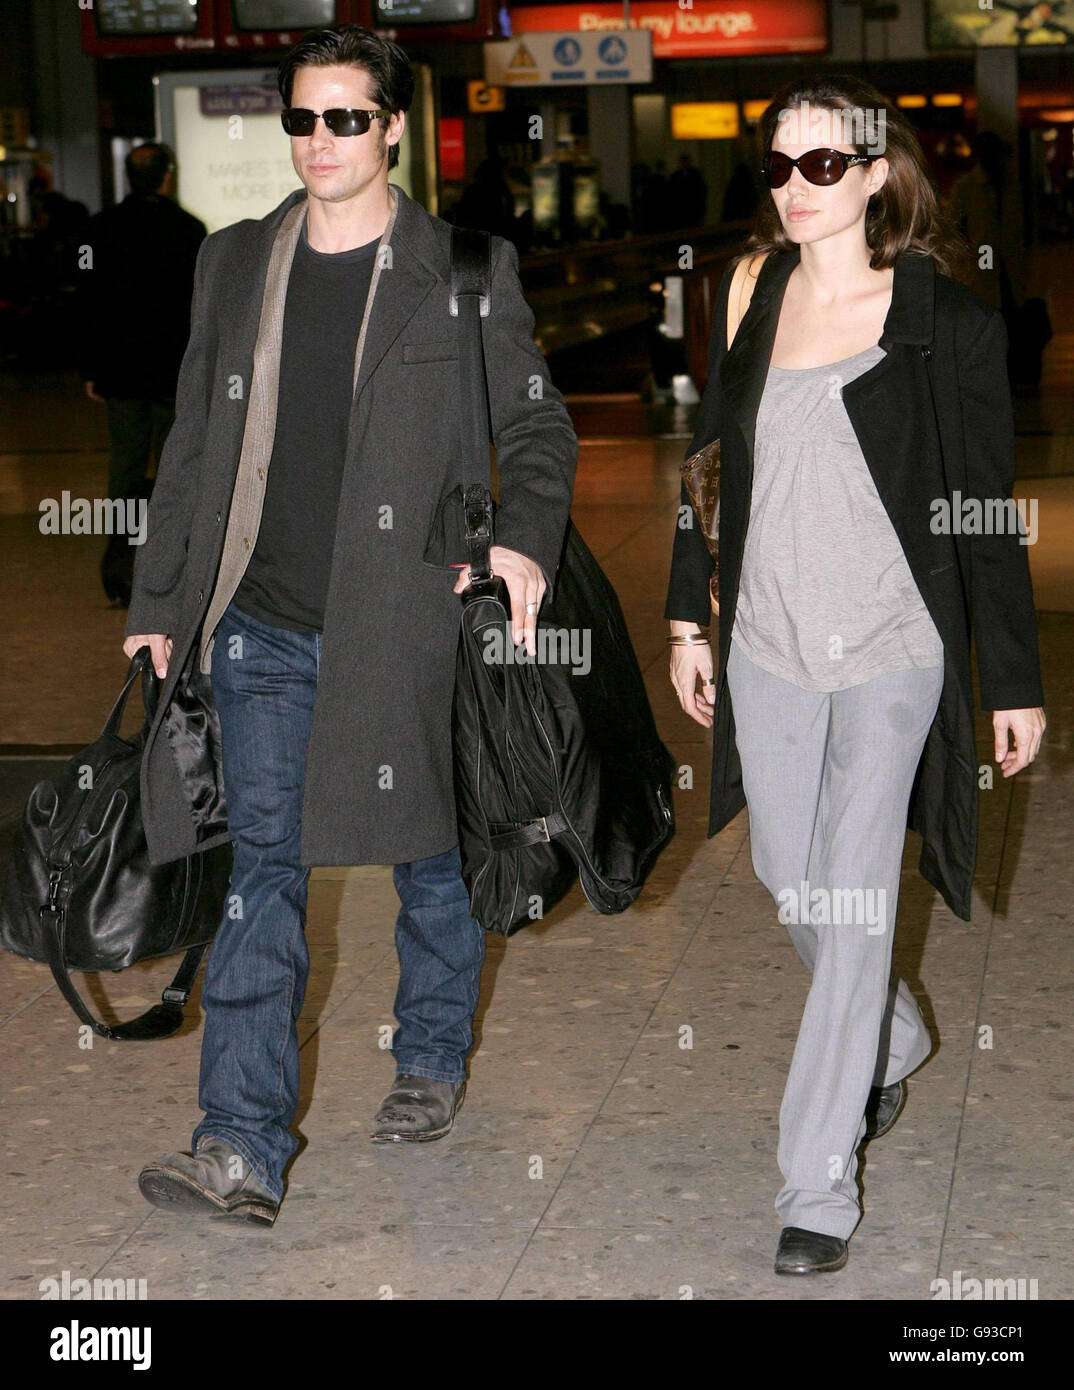 Brad Pitt and Angelina Jolie at Heathrow Airport, where they are due to leave the UK on a flight to Zurich, Wednesday January 25, 2006. PRESS ASSOCIATION PHOTO. Photo credit should read: Tim Ockenden/PA Stock Photo